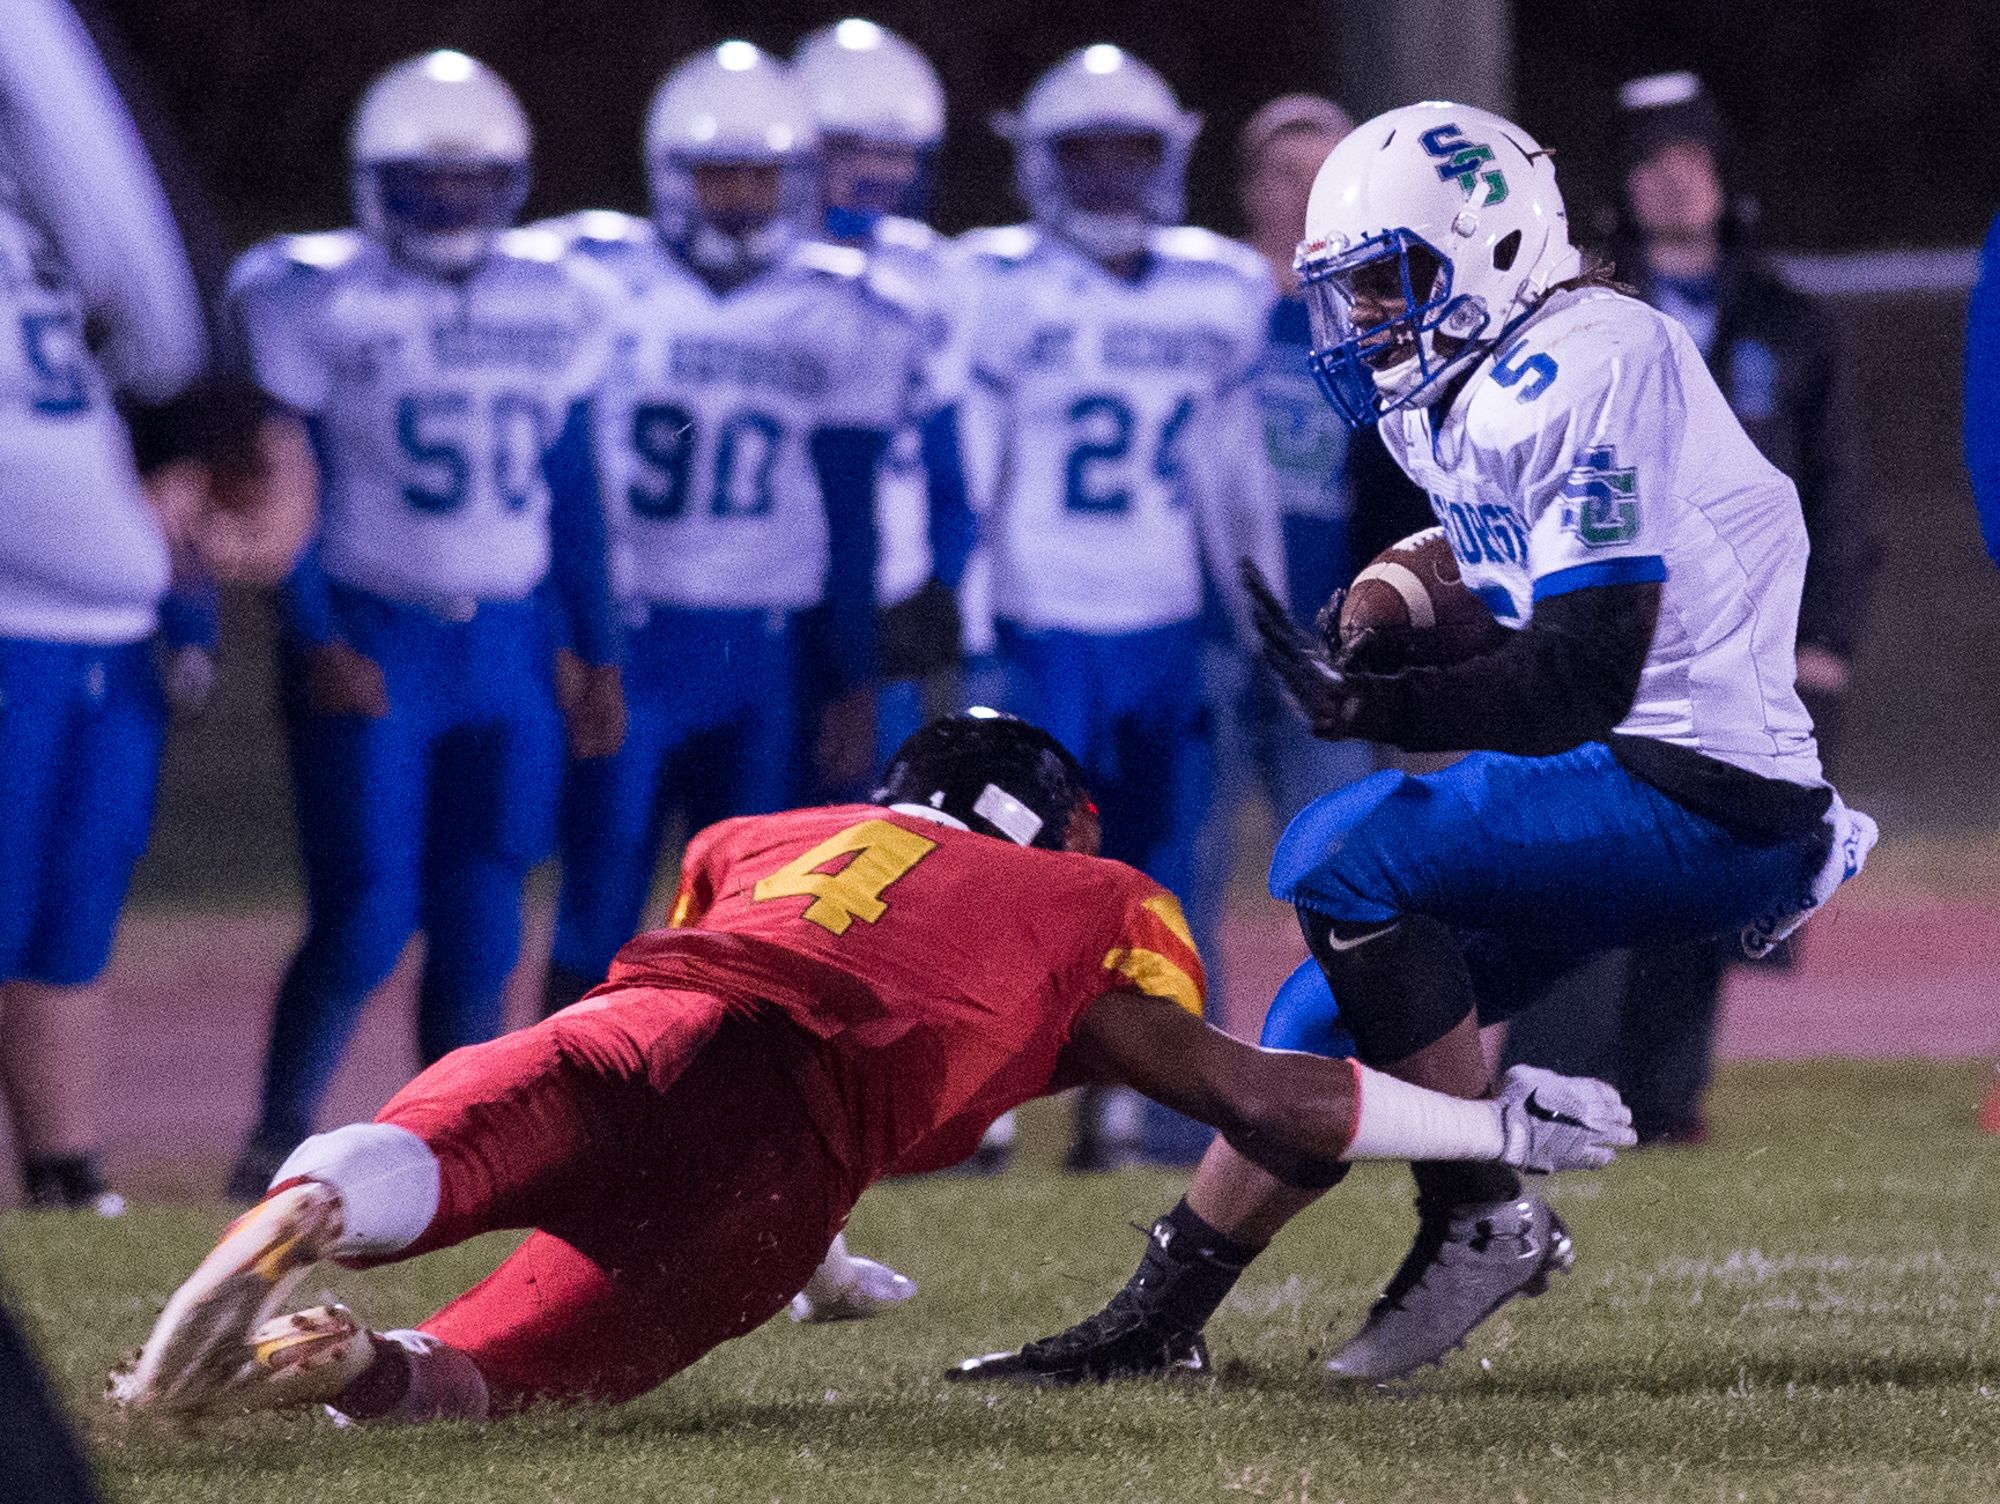 St. Georges' Brian Benson (5) is tackled by Glasgow's Reginald Grinnell (4) in the first quarter at their game at Glasgow High School.